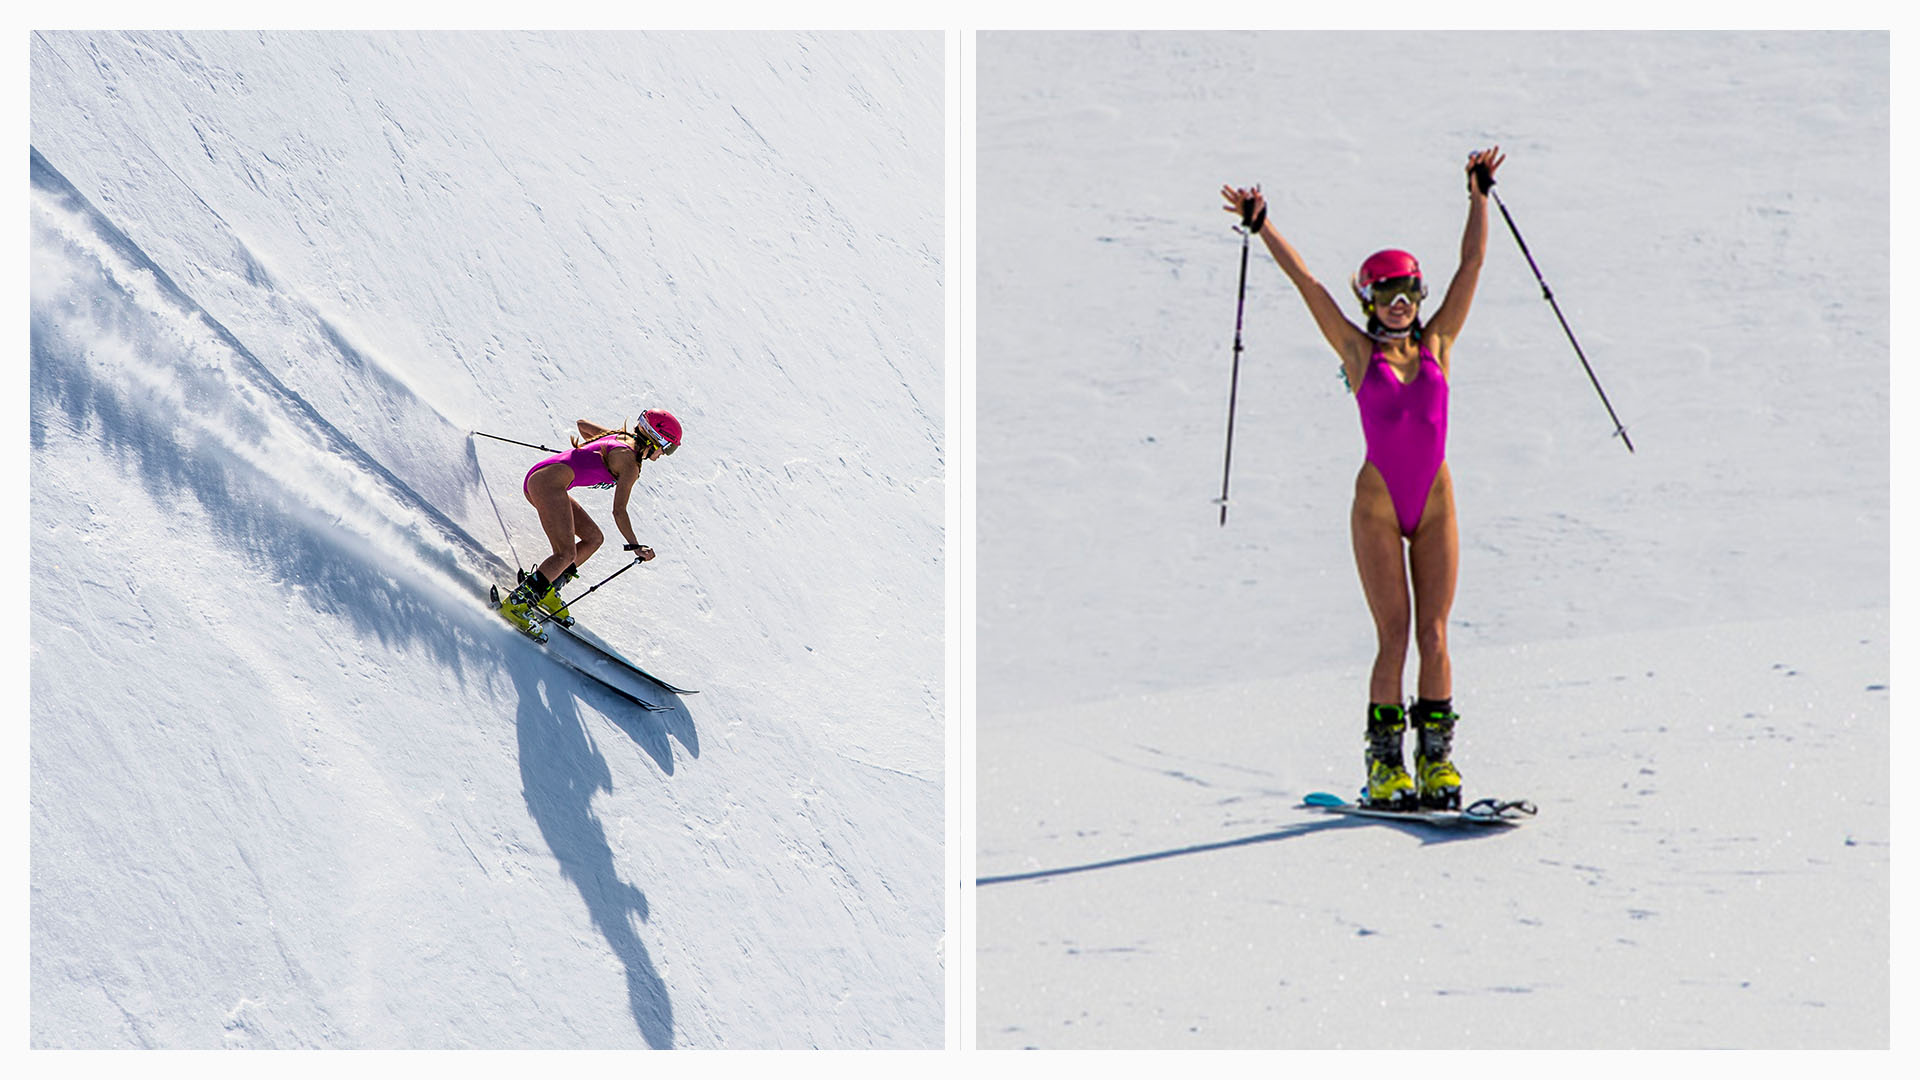 Sierra Quitiquit skis in Iceland in pink bathing suit